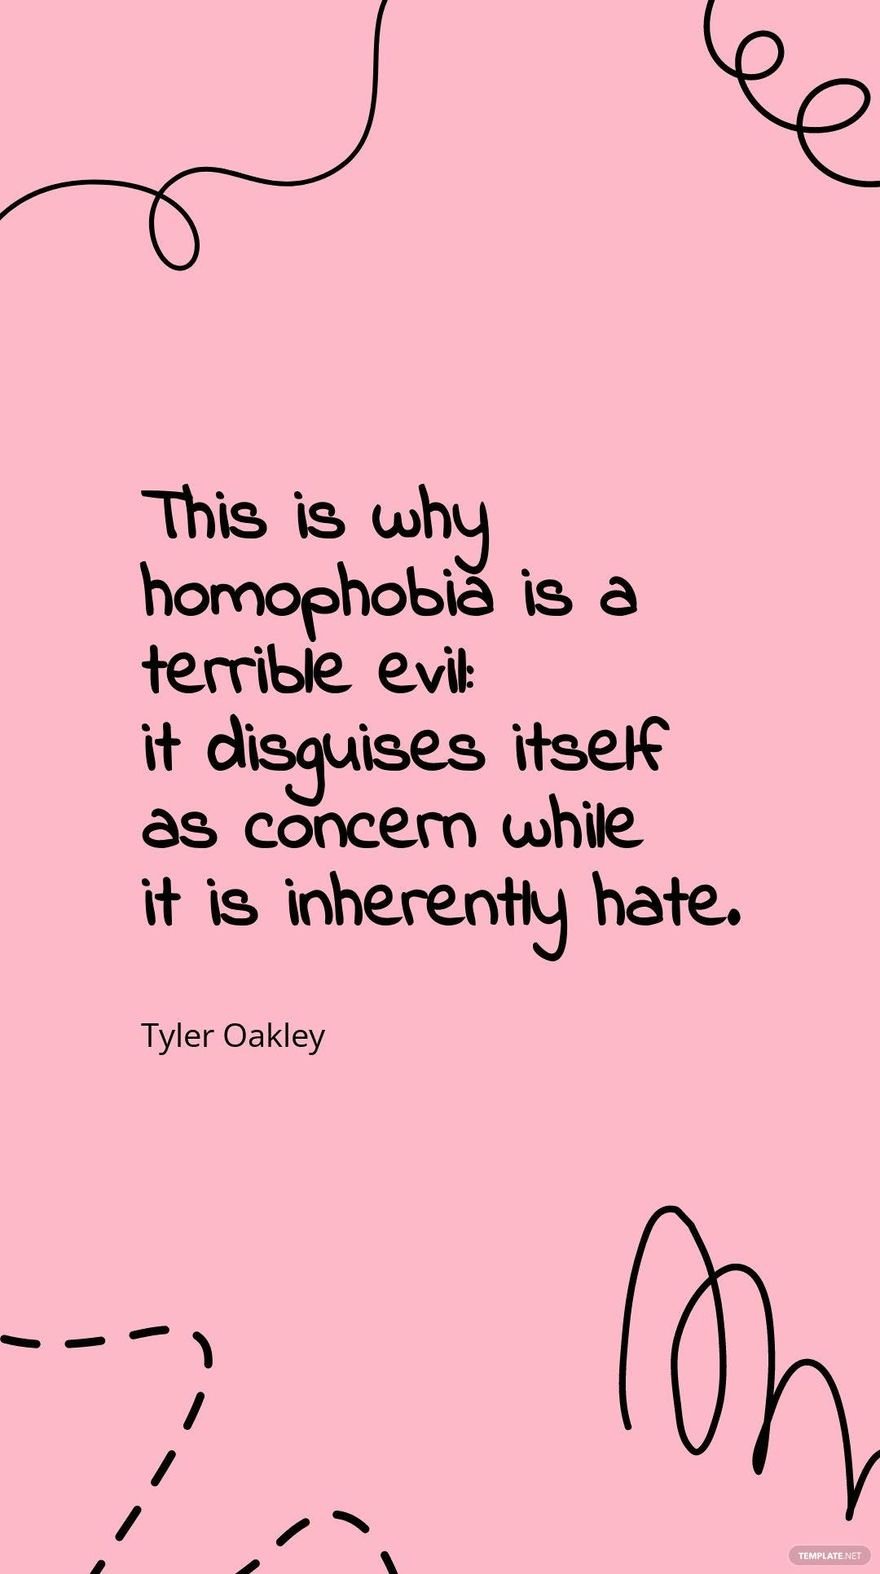 Tyler Oakley - This is why homophobia is a terrible evil: it disguises itself as concern while it is inherently hate. in JPG